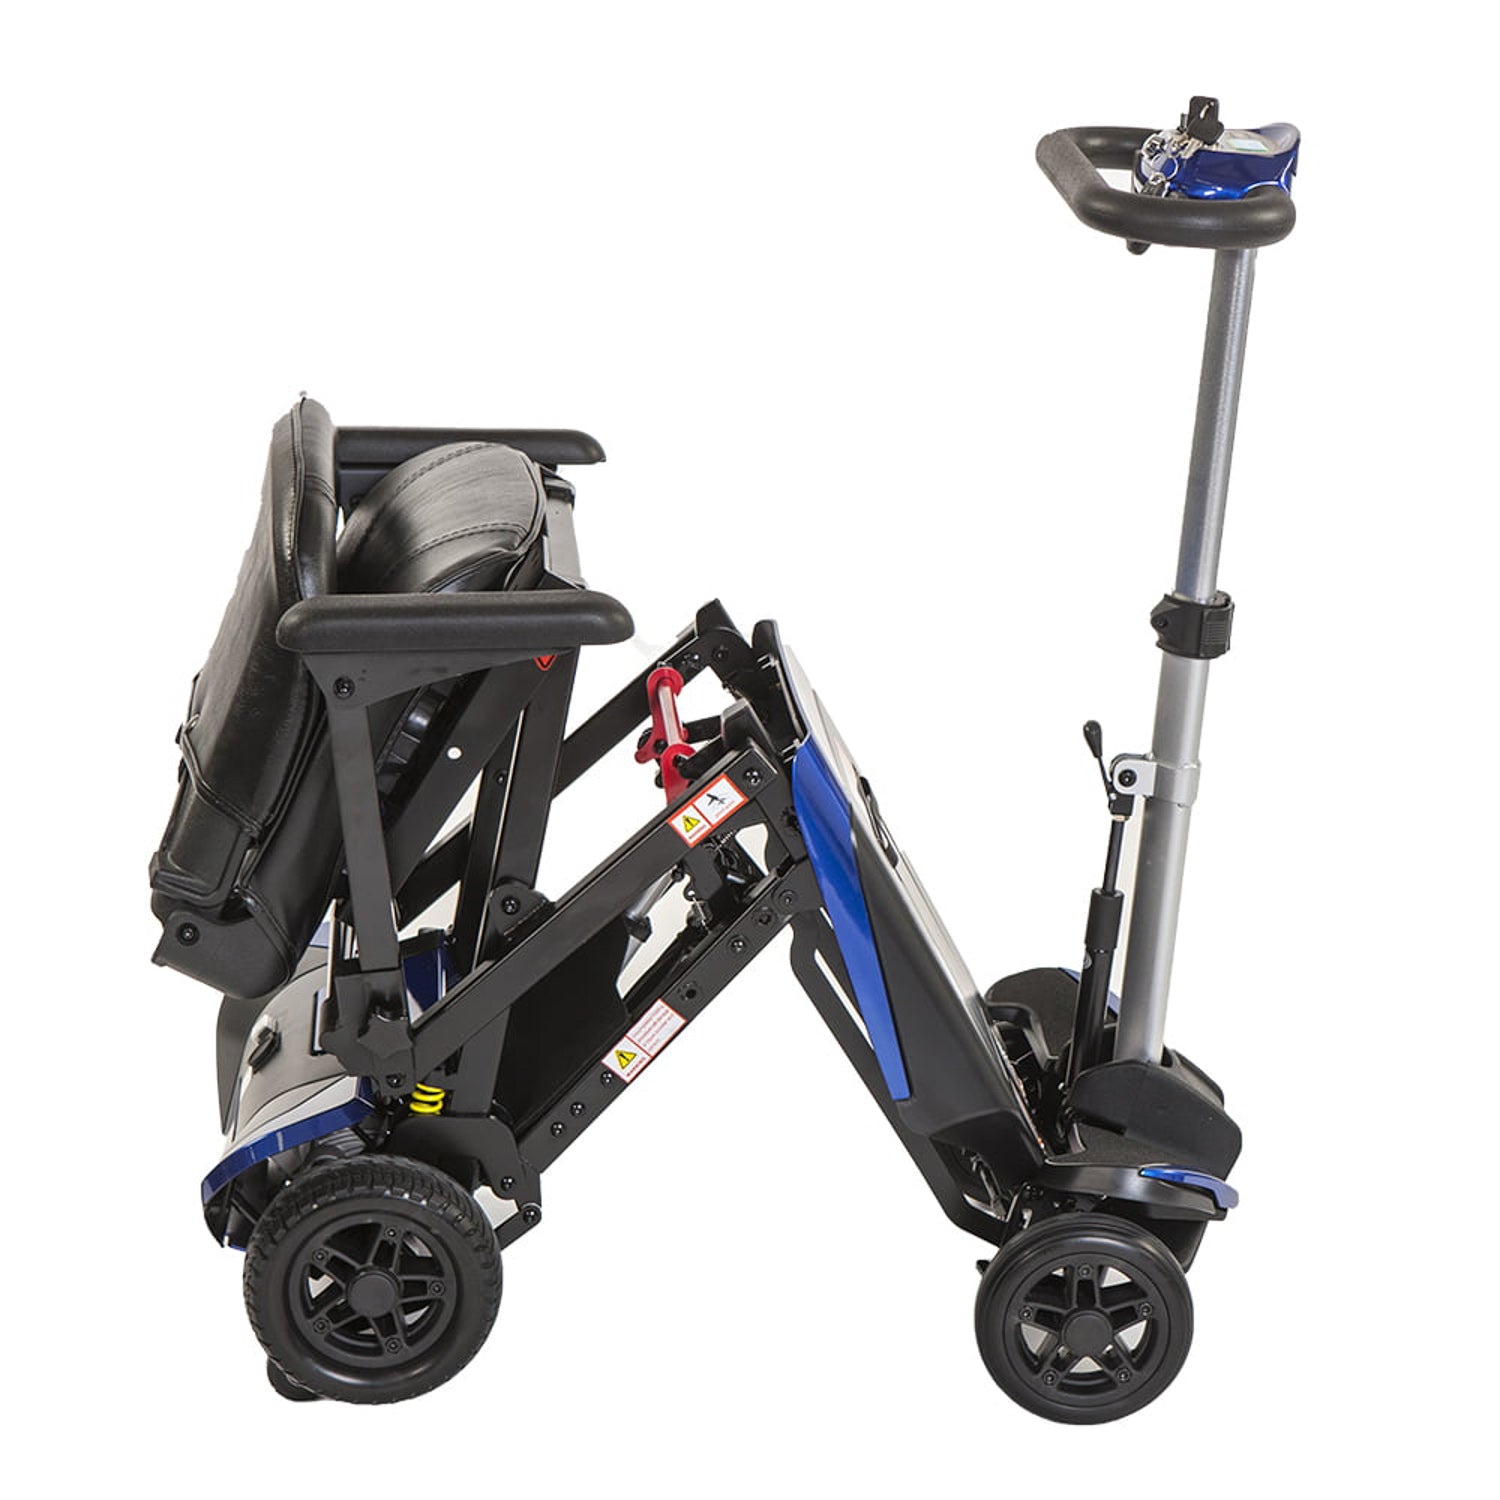 The ALL NEW SMARTI with Rear Suspension for Improved Comfort Remote Auto-Folding Travel Mobility Scooter